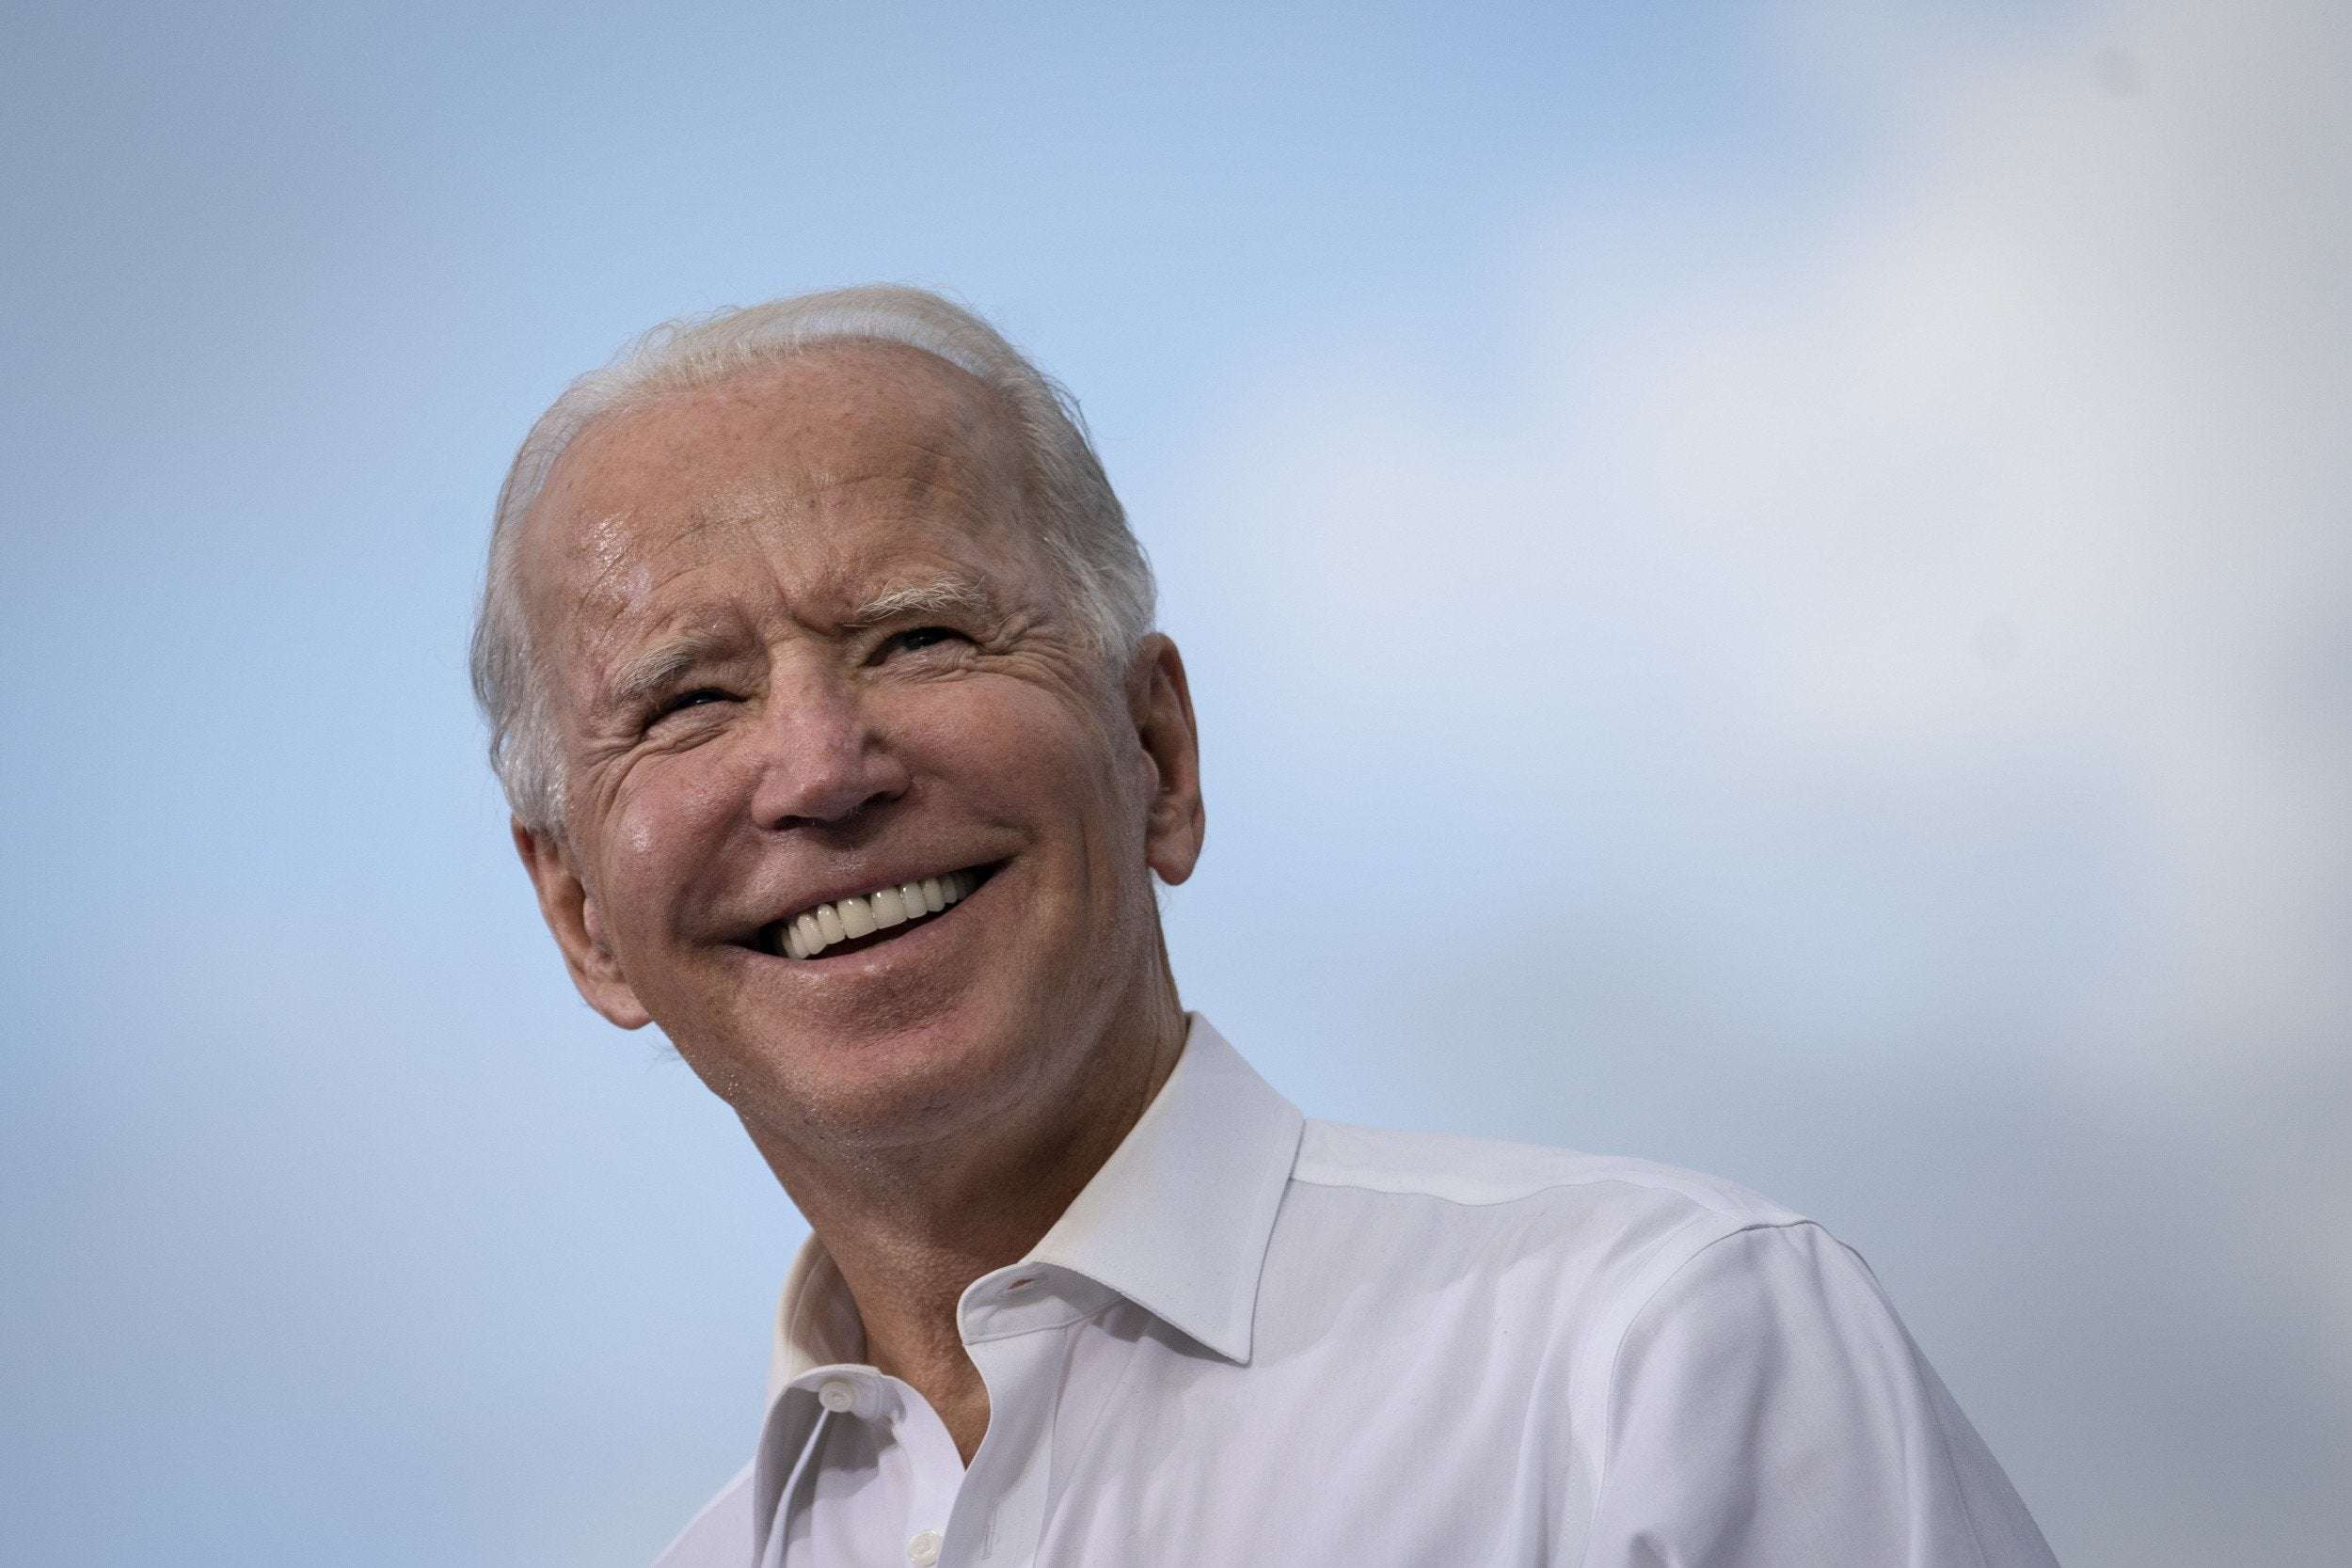 image for Majority of Americans View Joe Biden as More of a Patriot Than Donald Trump, New Poll Shows